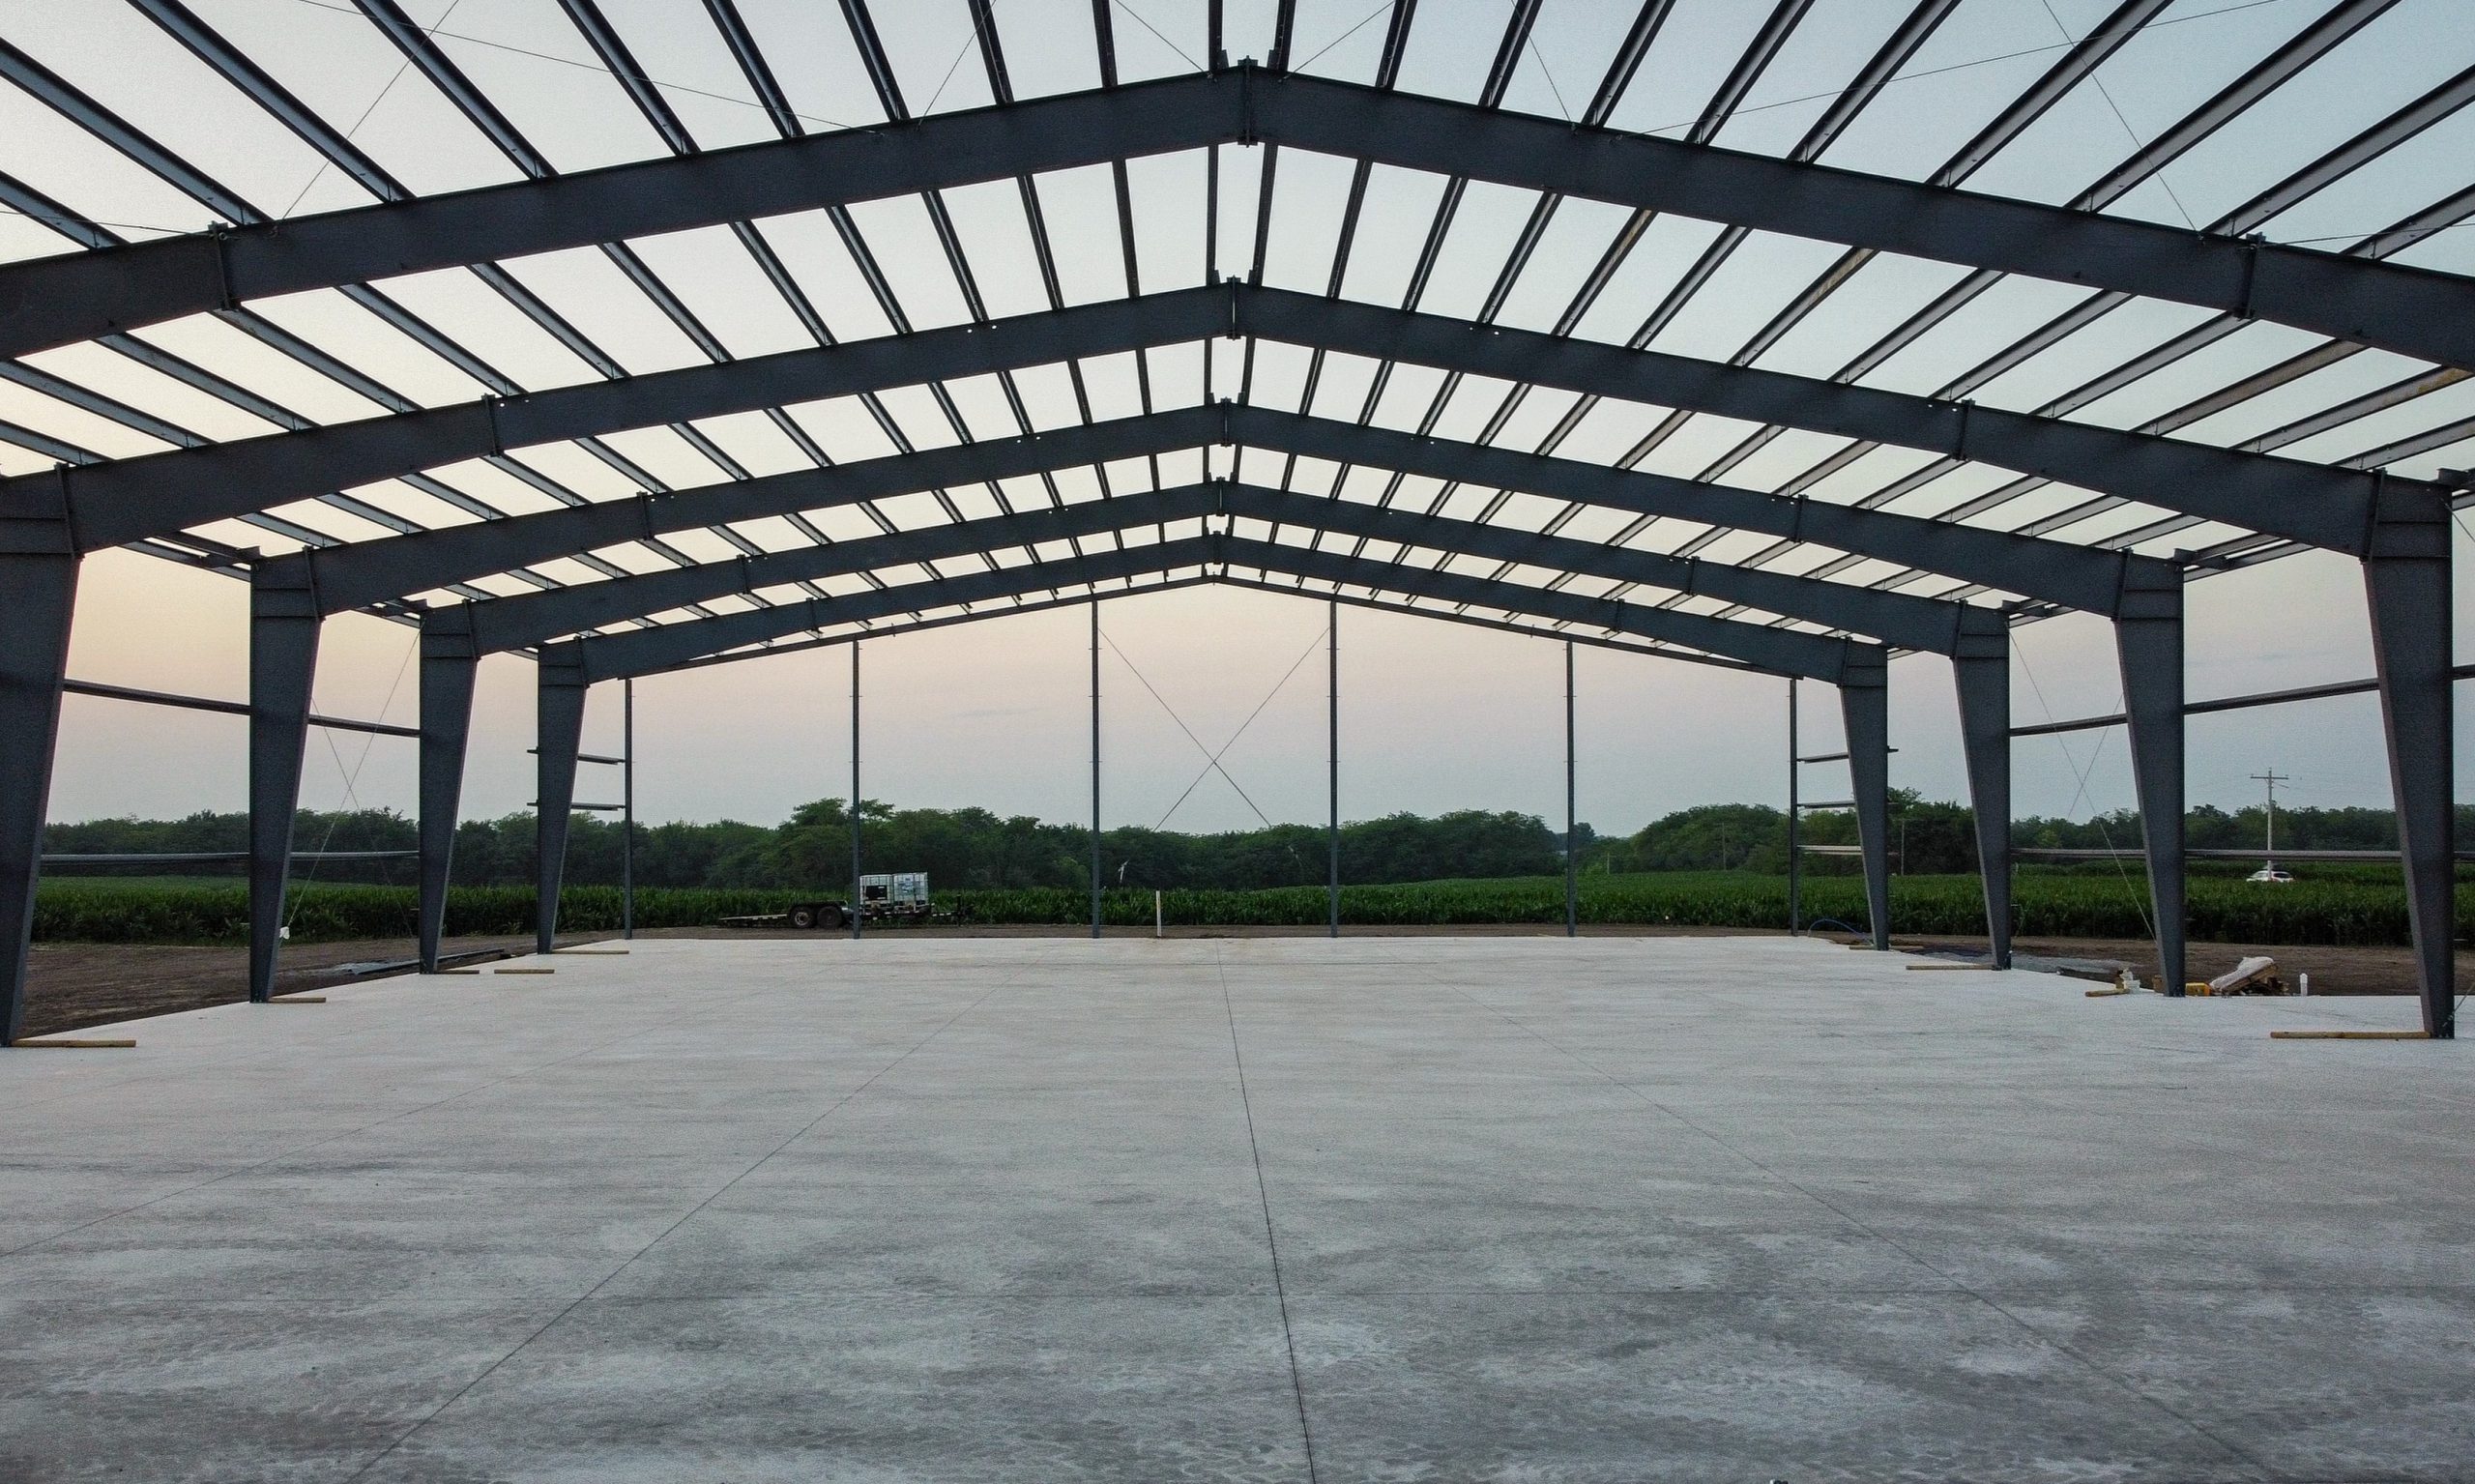 Partially constructed large metal building frame with steel beams, standing on a concrete foundation. The surrounding area is outdoors with green fields and trees visible in the background. The sky is clear with early morning or late afternoon light